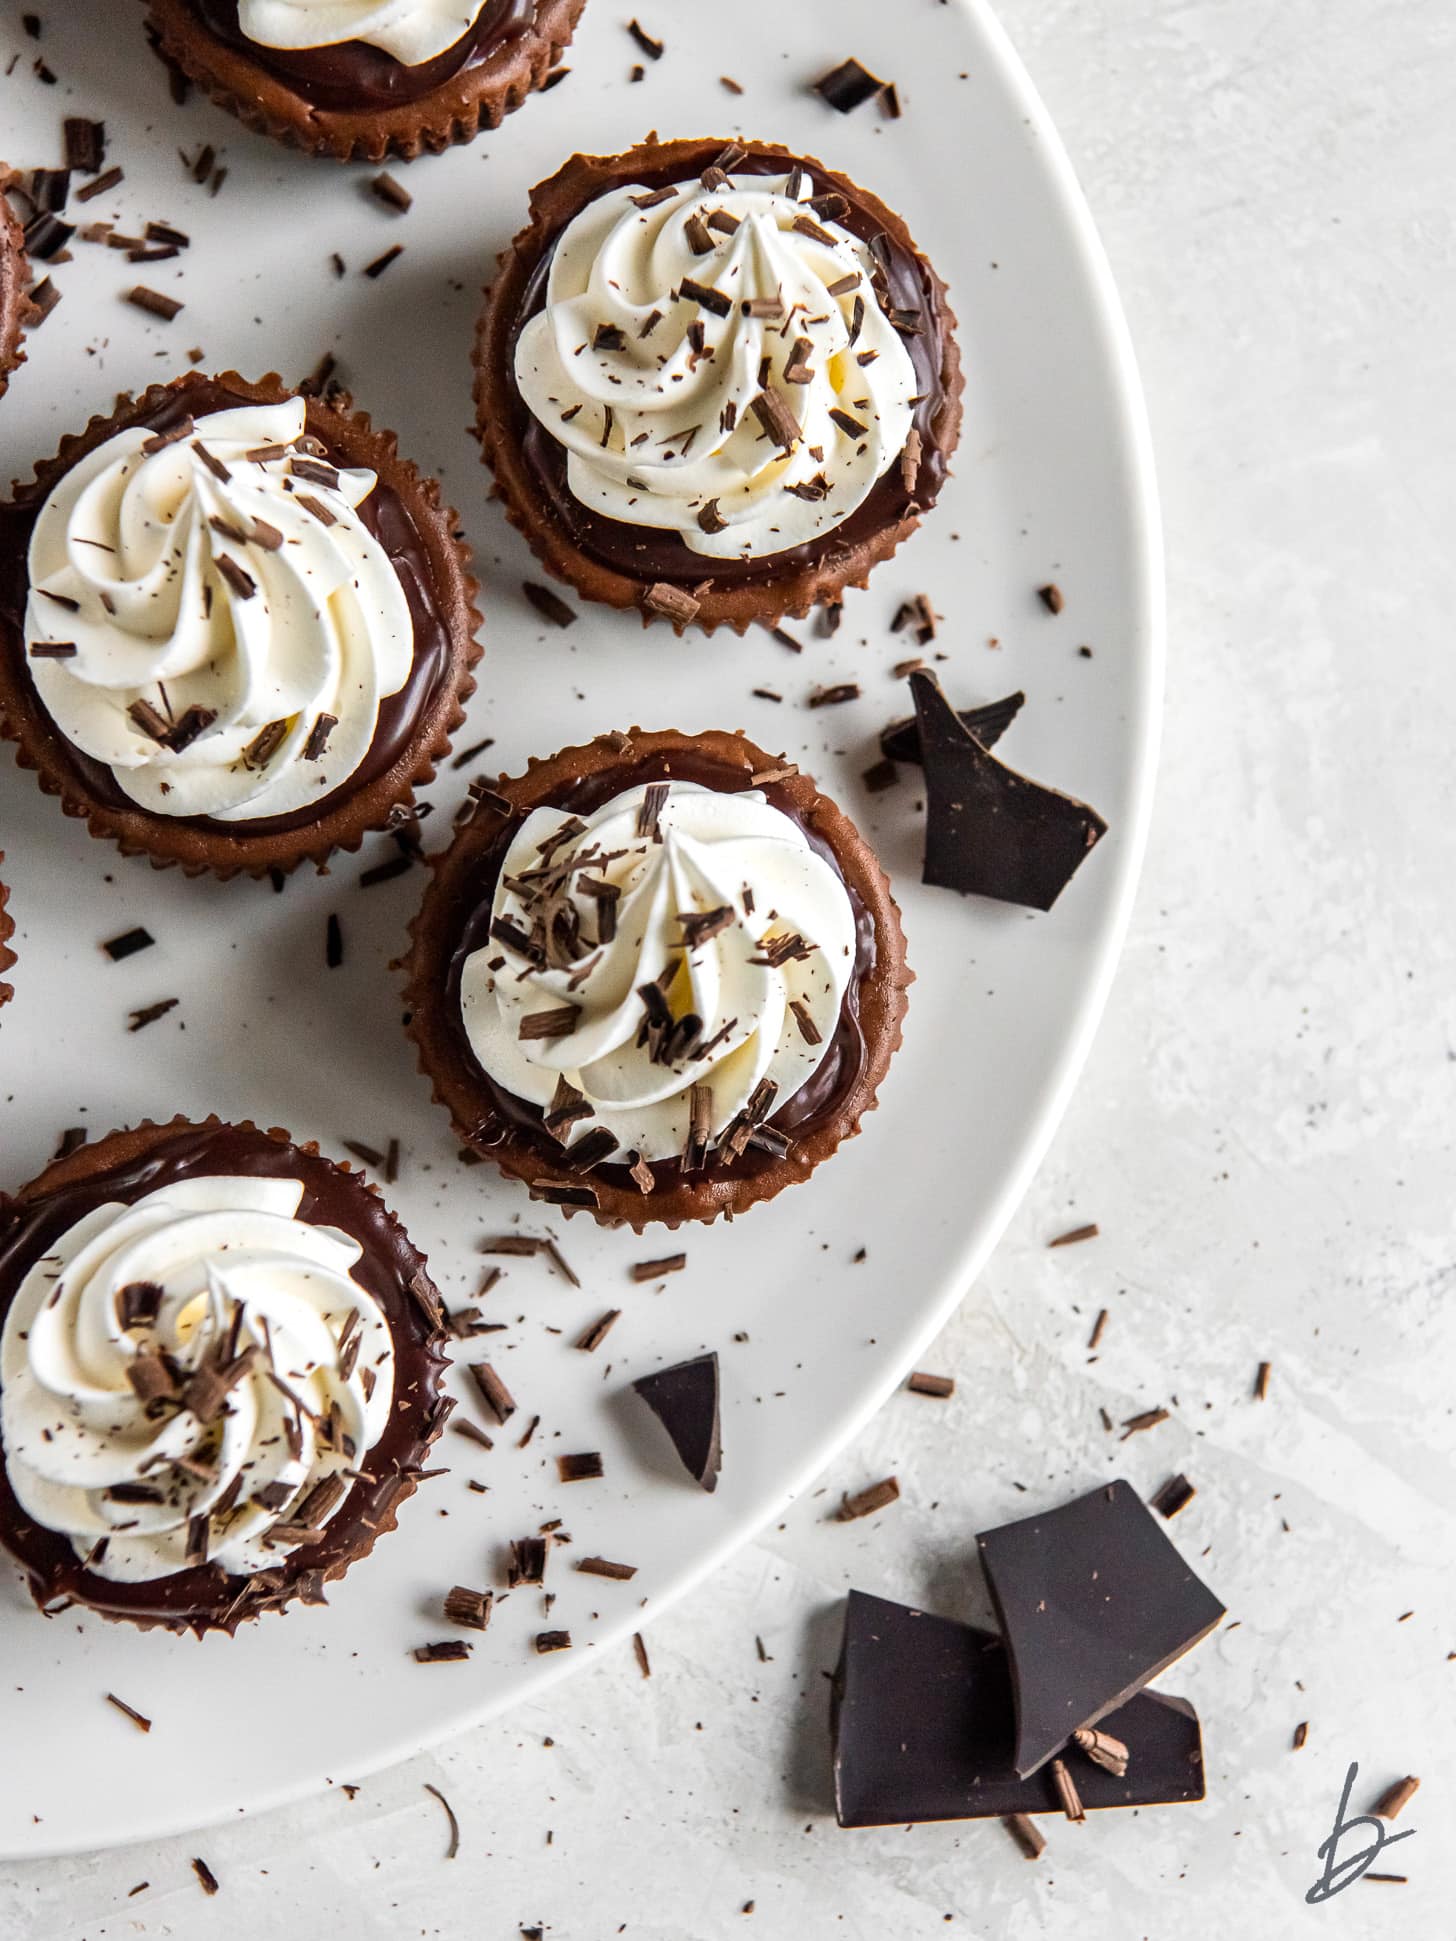 mini chocolate cheesecakes on a plate with some chopped chcolate.